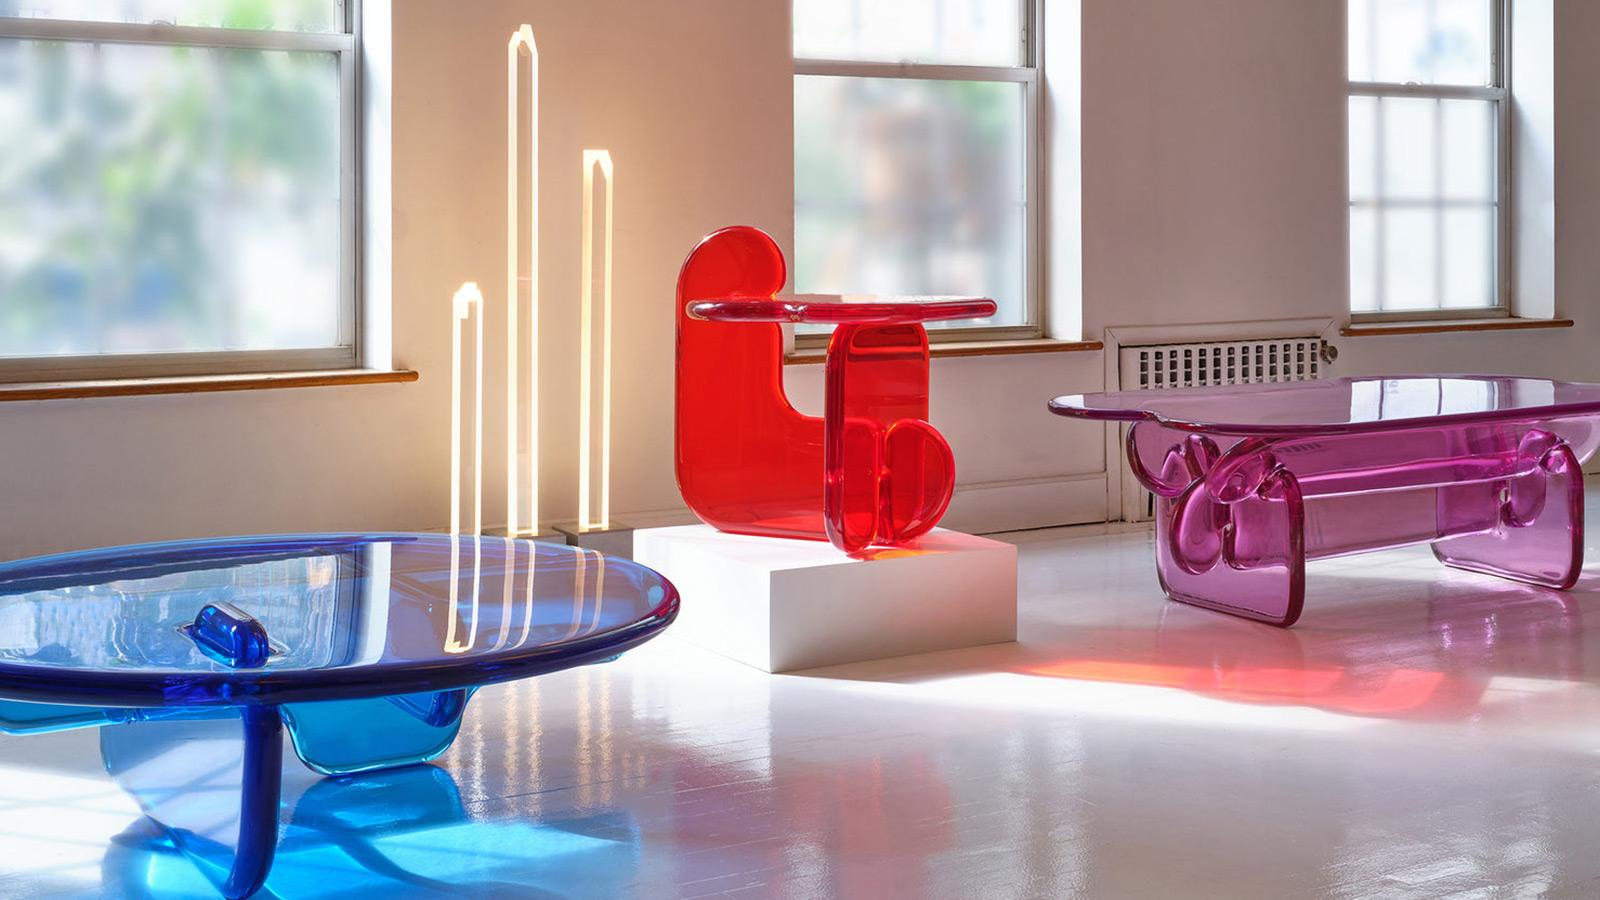 Ian Alistair Cochran’s Resin Furniture and Home Goods